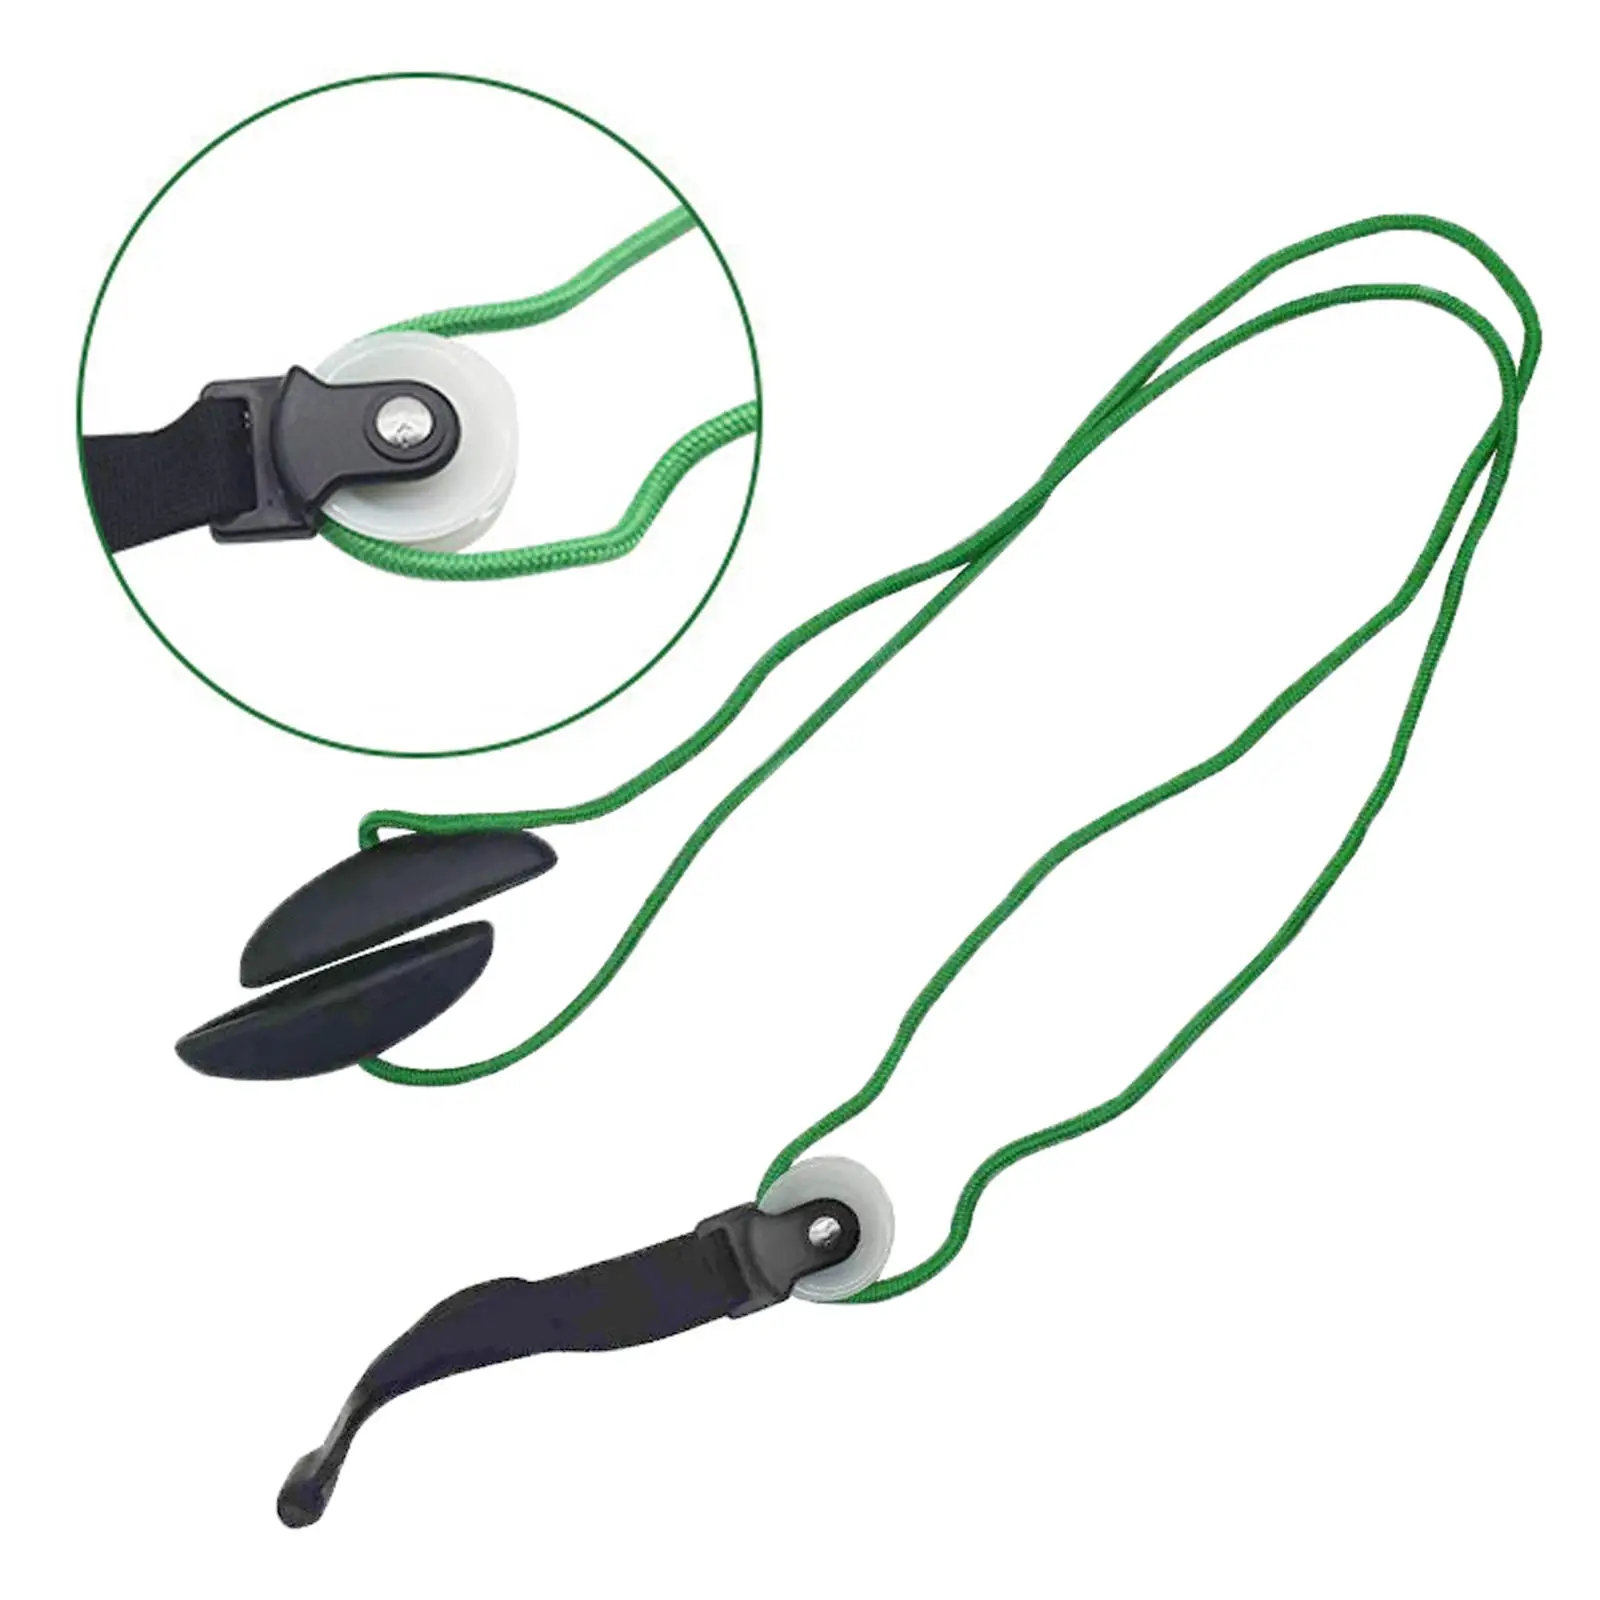 1 Piece  Pulley Over The Door Upper Limb  Training Resistance Band  Reduction Door Hanging Pulley for Fitness Home Gym